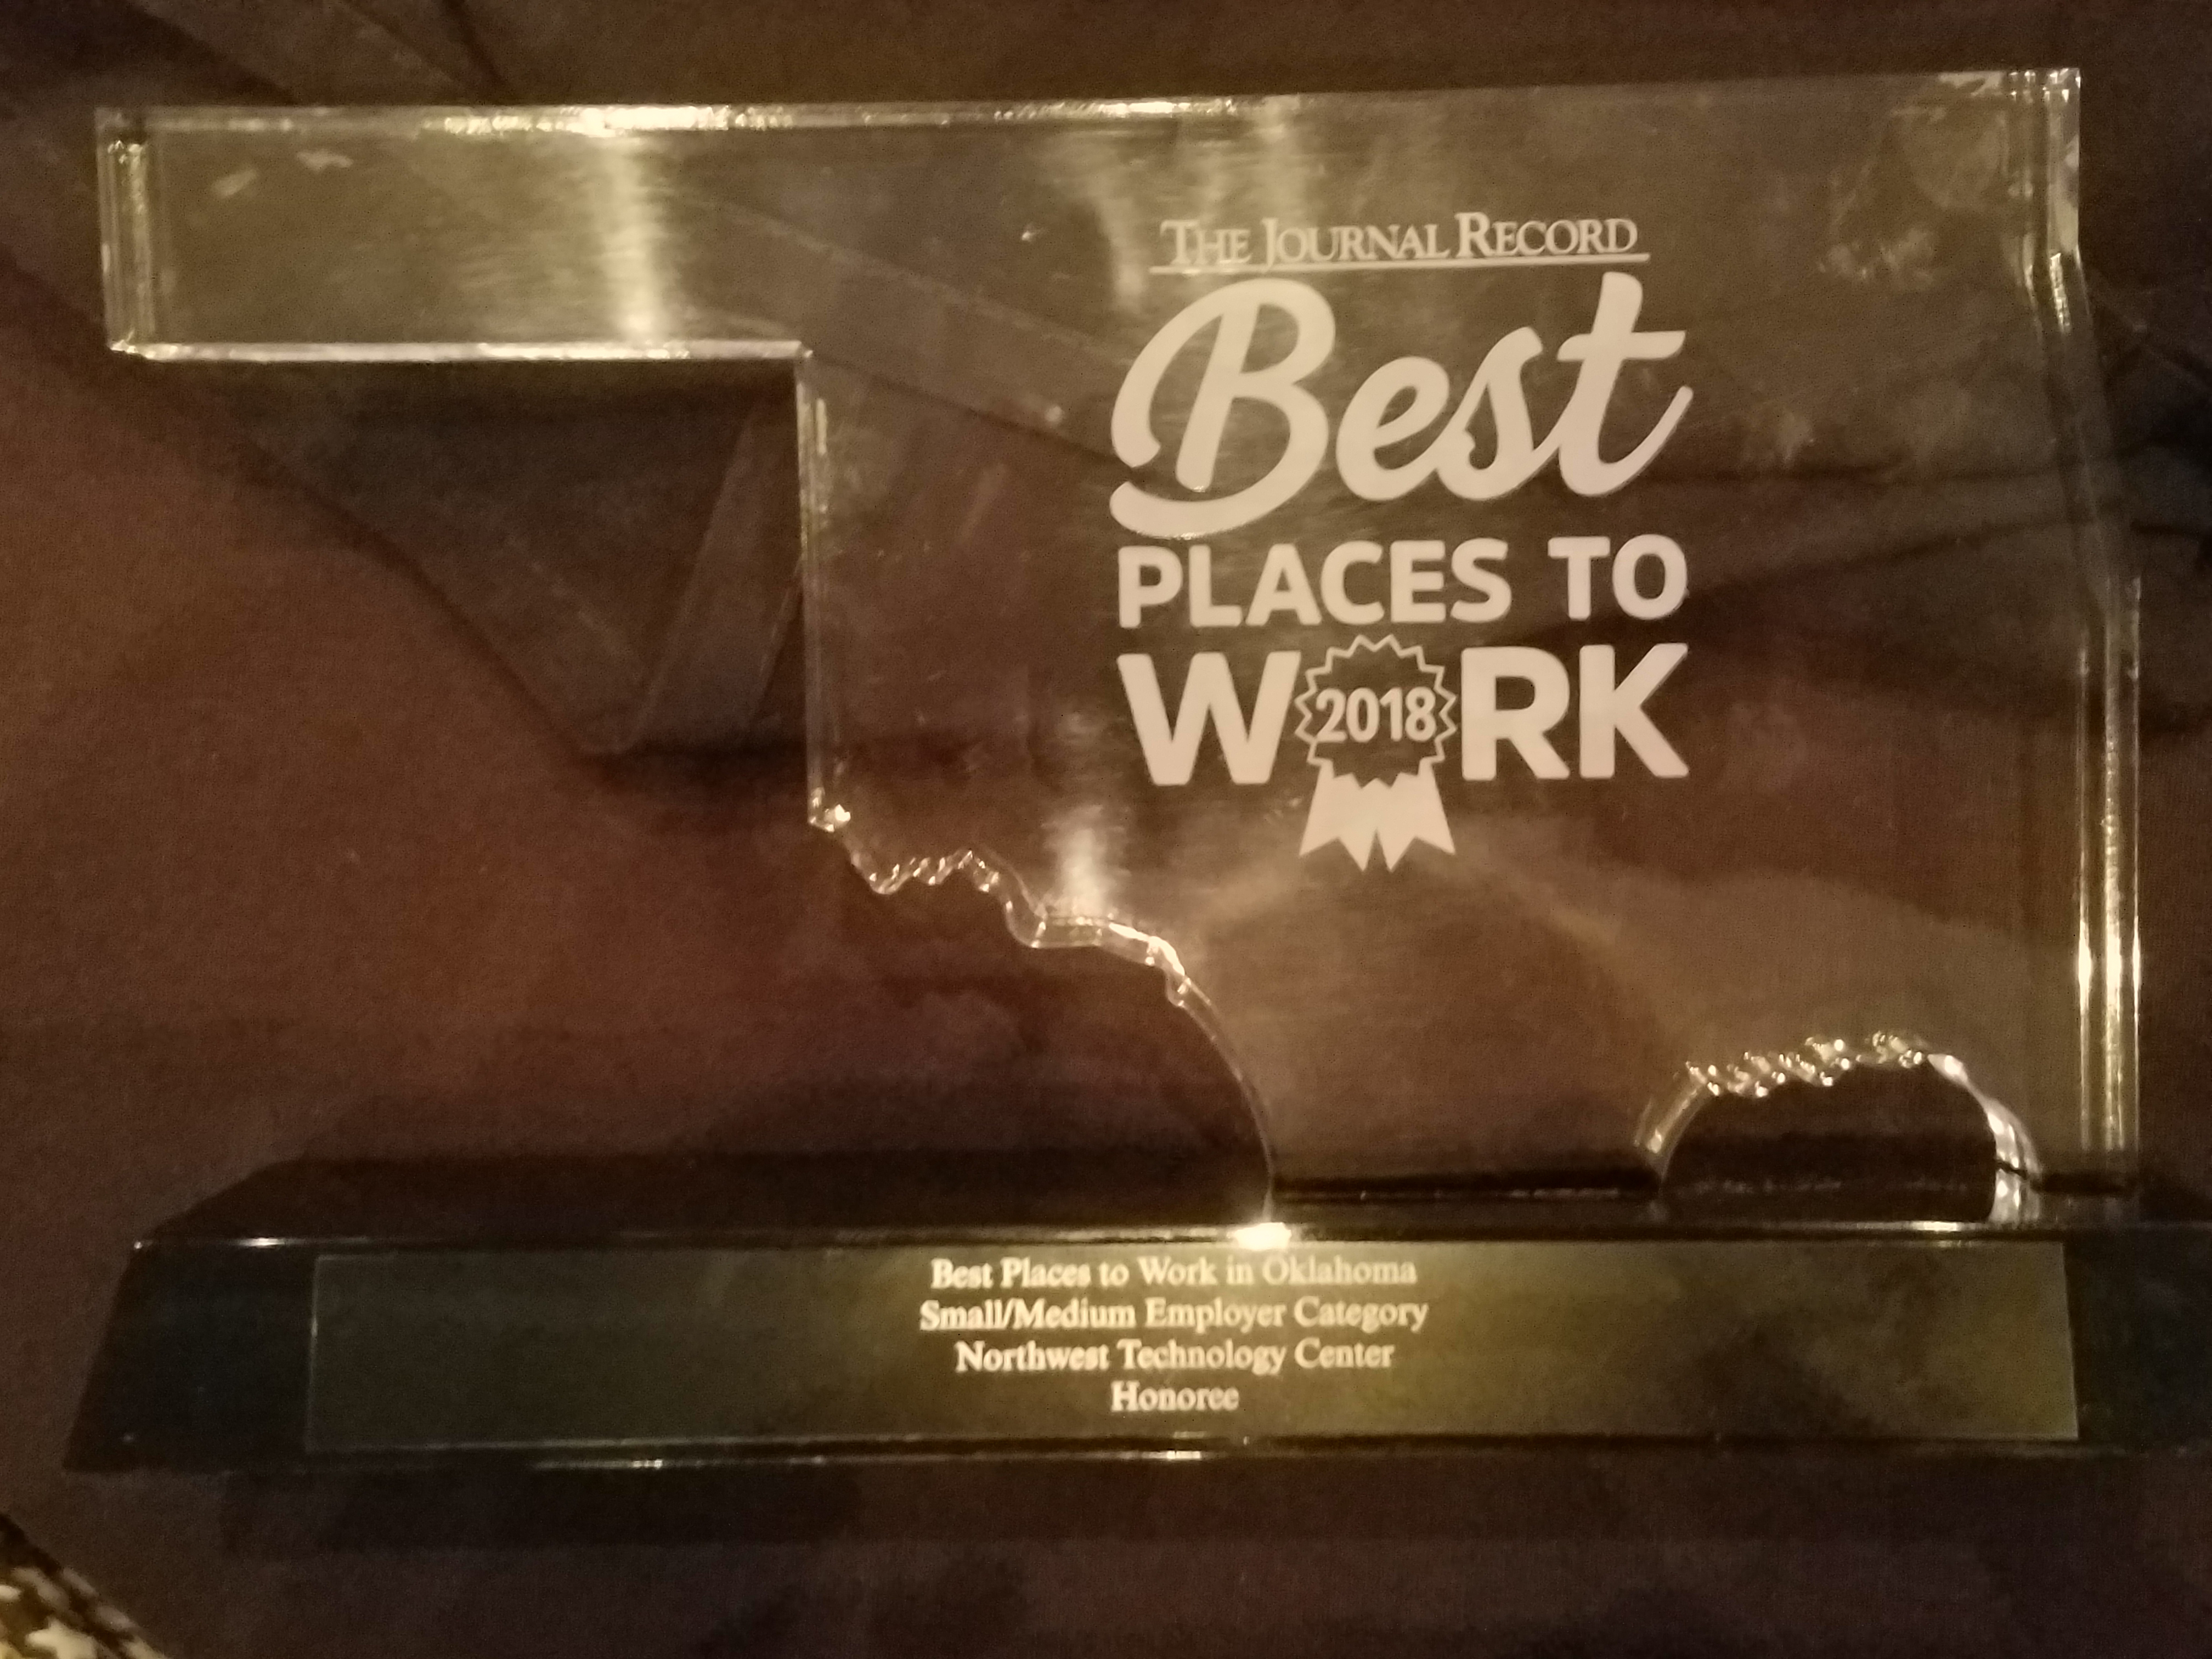 NWTC Recognized With Best Places To Work Award